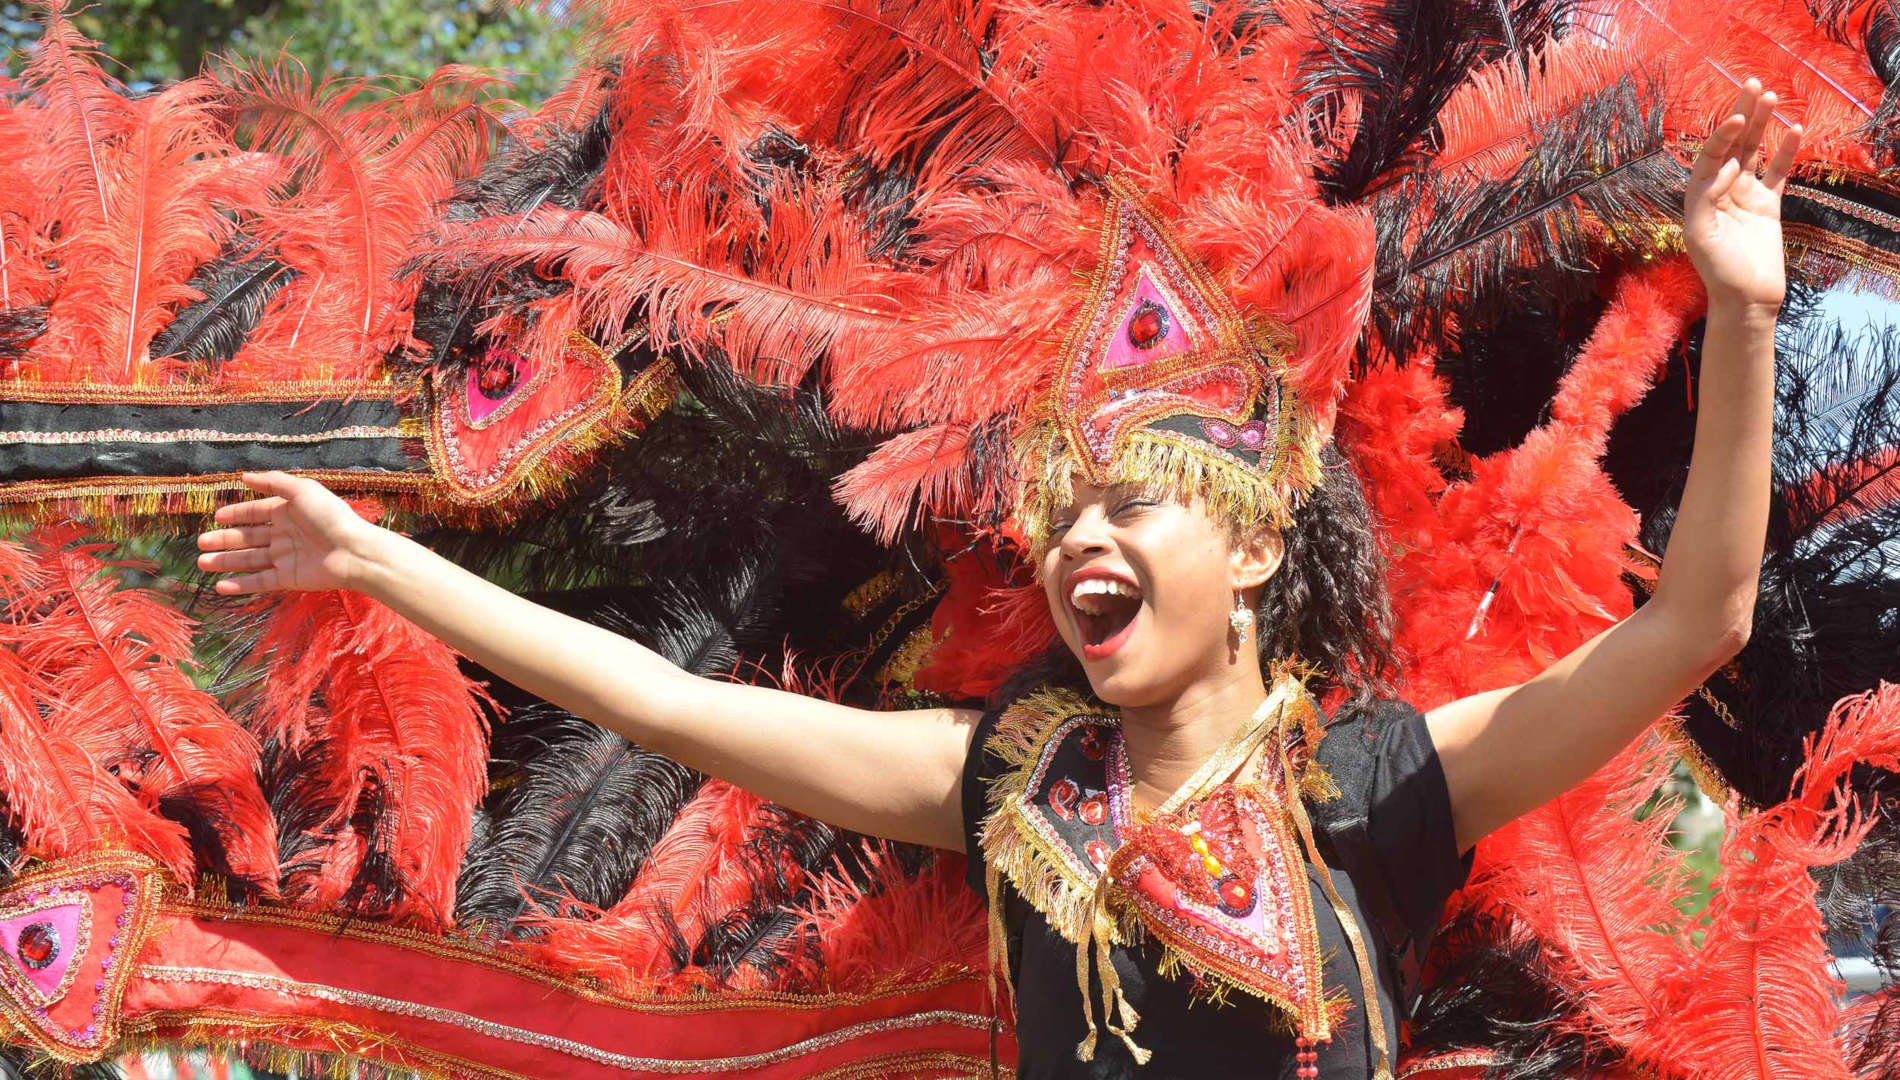 Young person dancing at the carnival wearing a feathered headpiece 